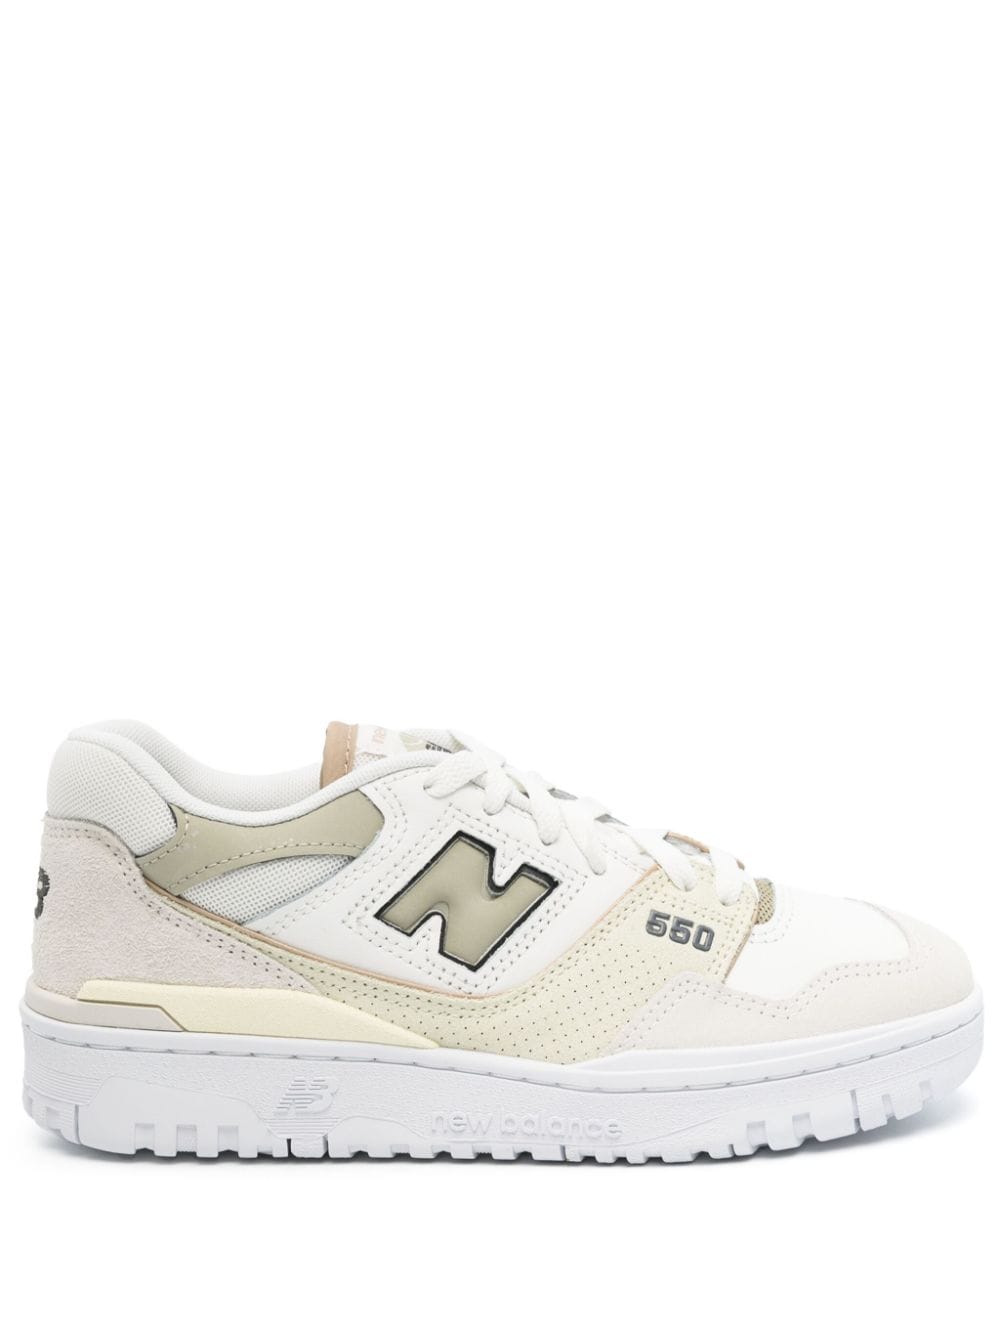 New Balance 550 perforated sneakers - Neutrals